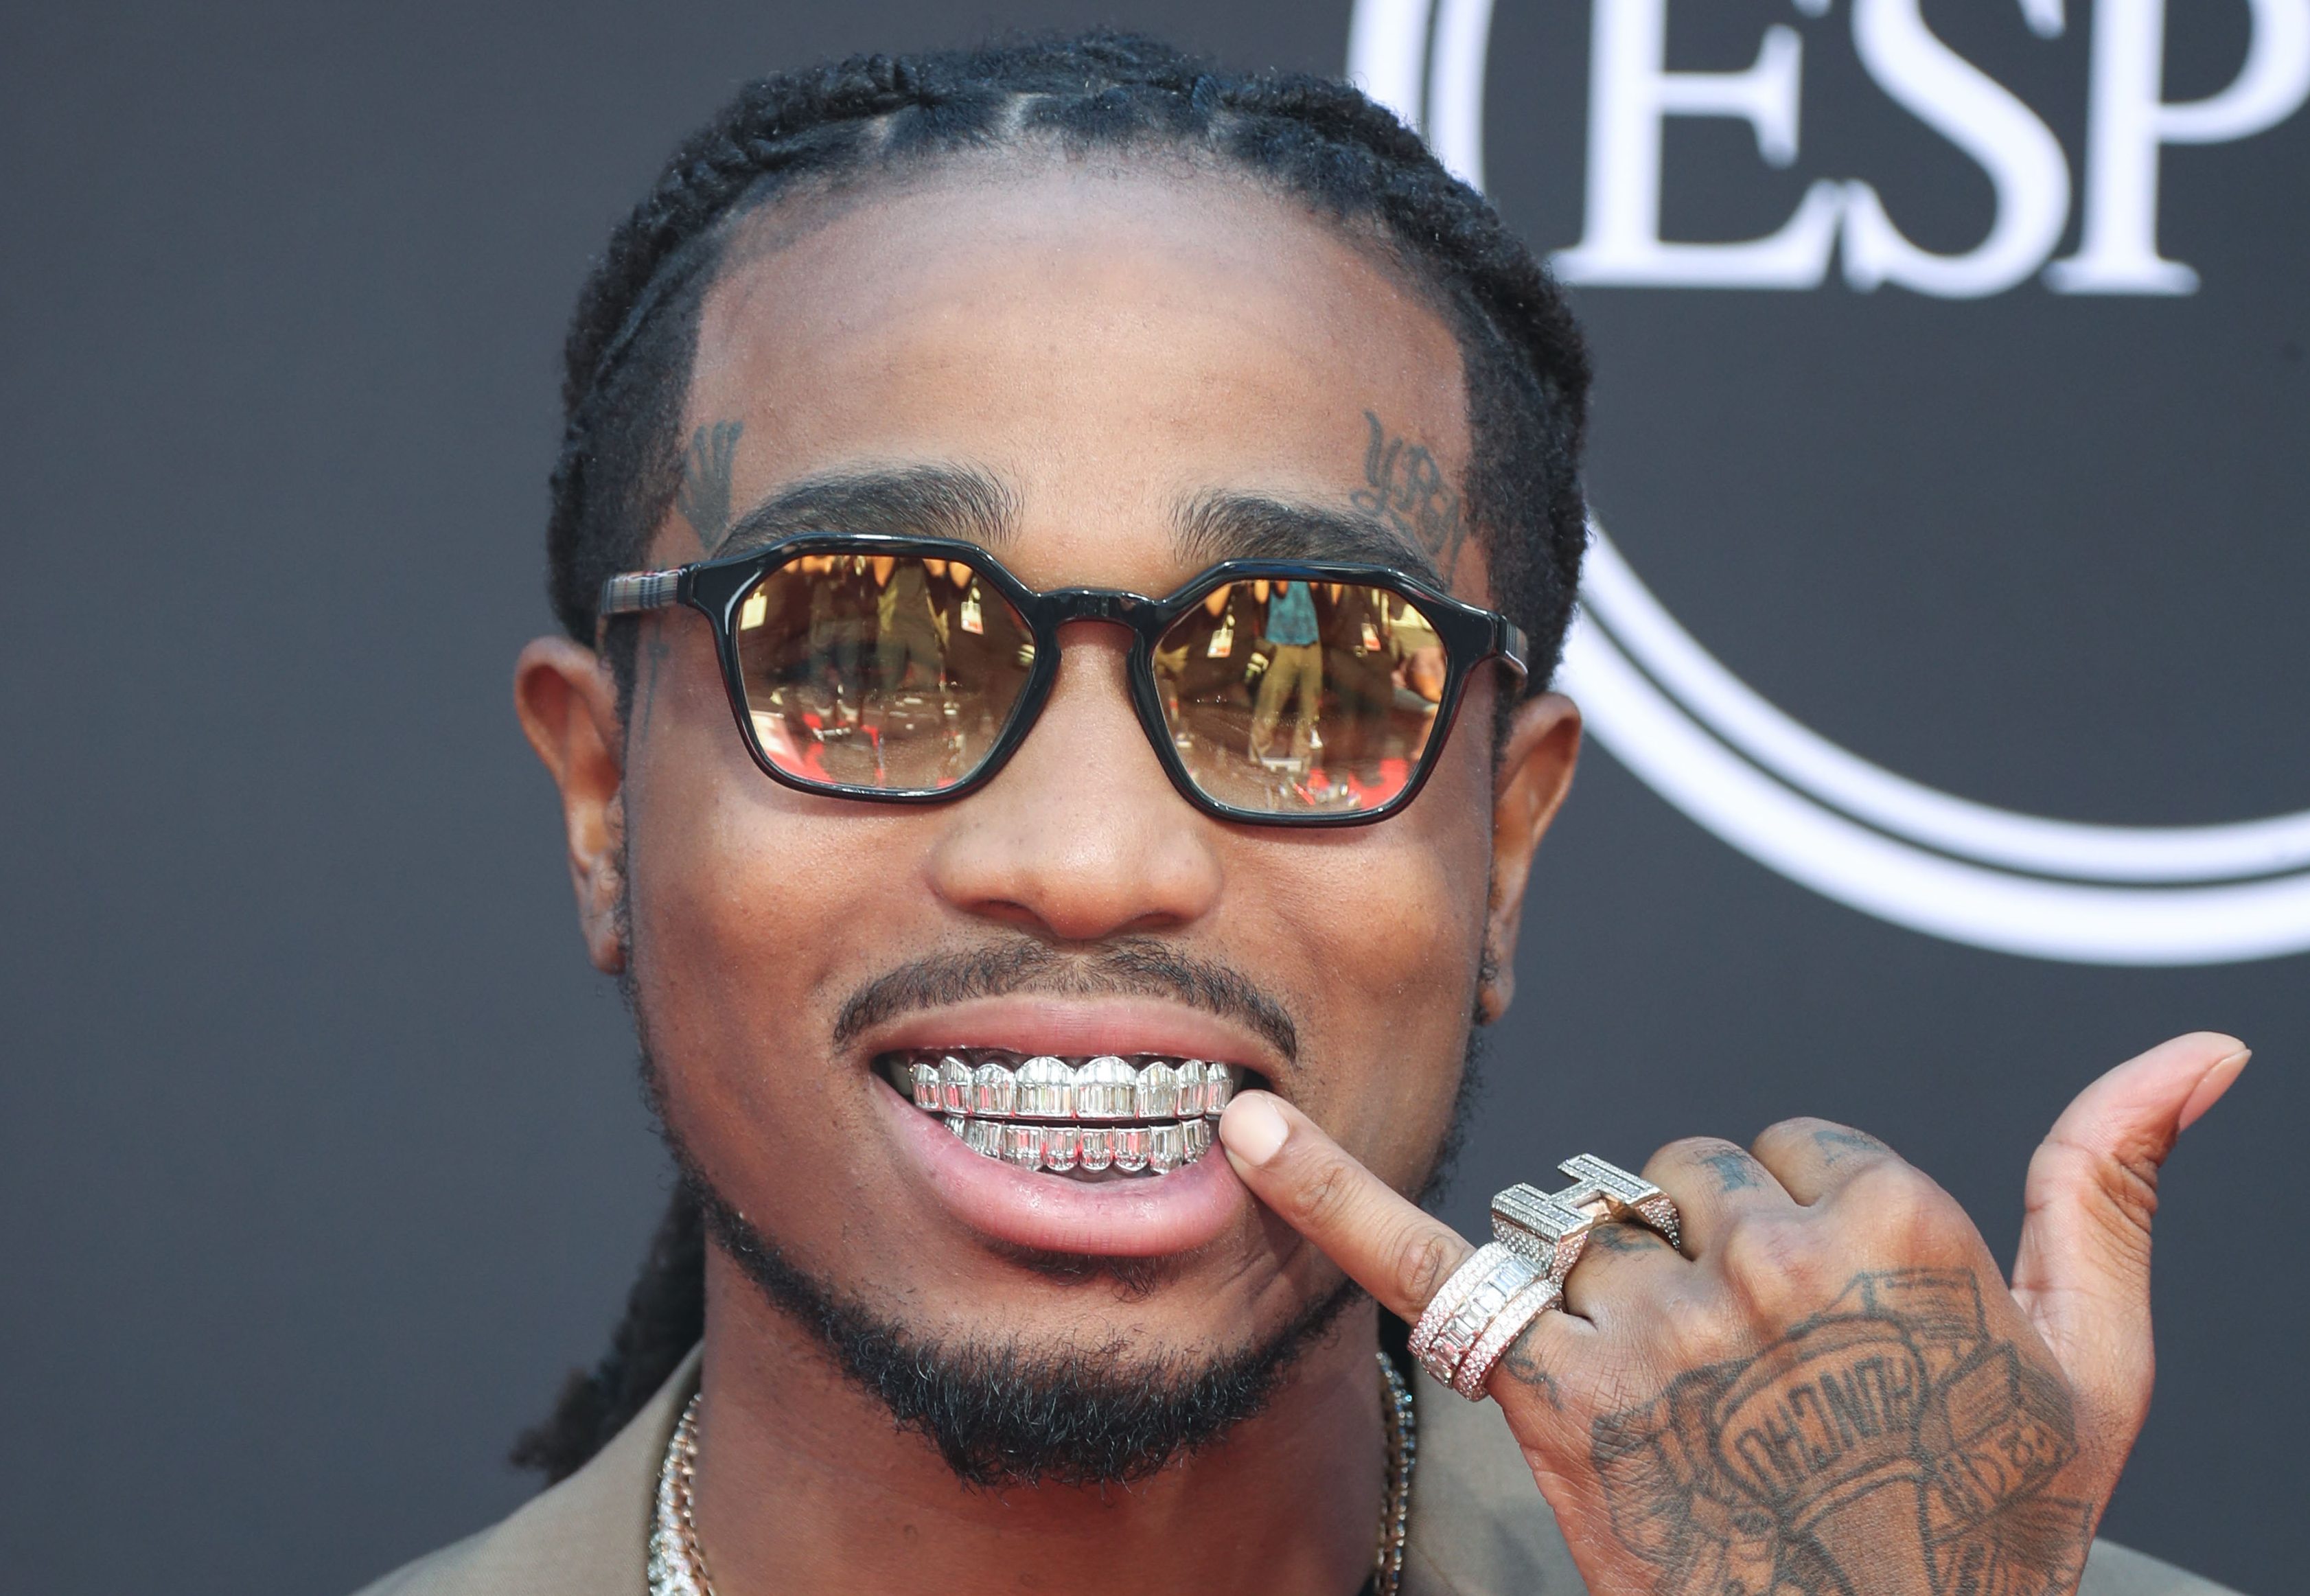 Quavo of Migos wearing Prada arrives at the 2019 ESPY Awards held at Microsoft Theater L.A. Live on July 10, 2019 in Los Angeles, California, United States. (Photo by Xavier Collin/Image Press Agency)